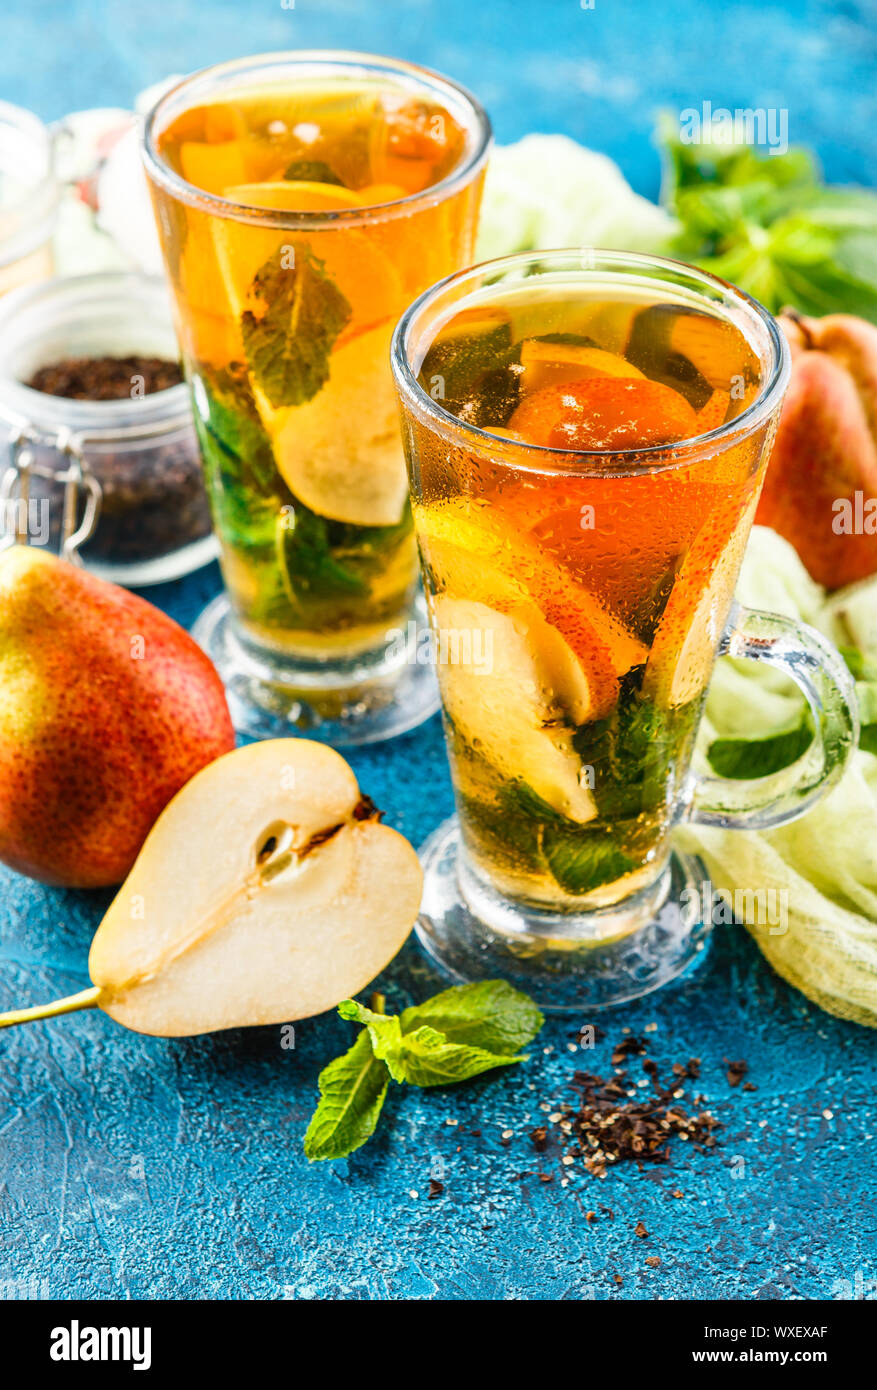 Ice tea with mint leaves and pear Stock Photo